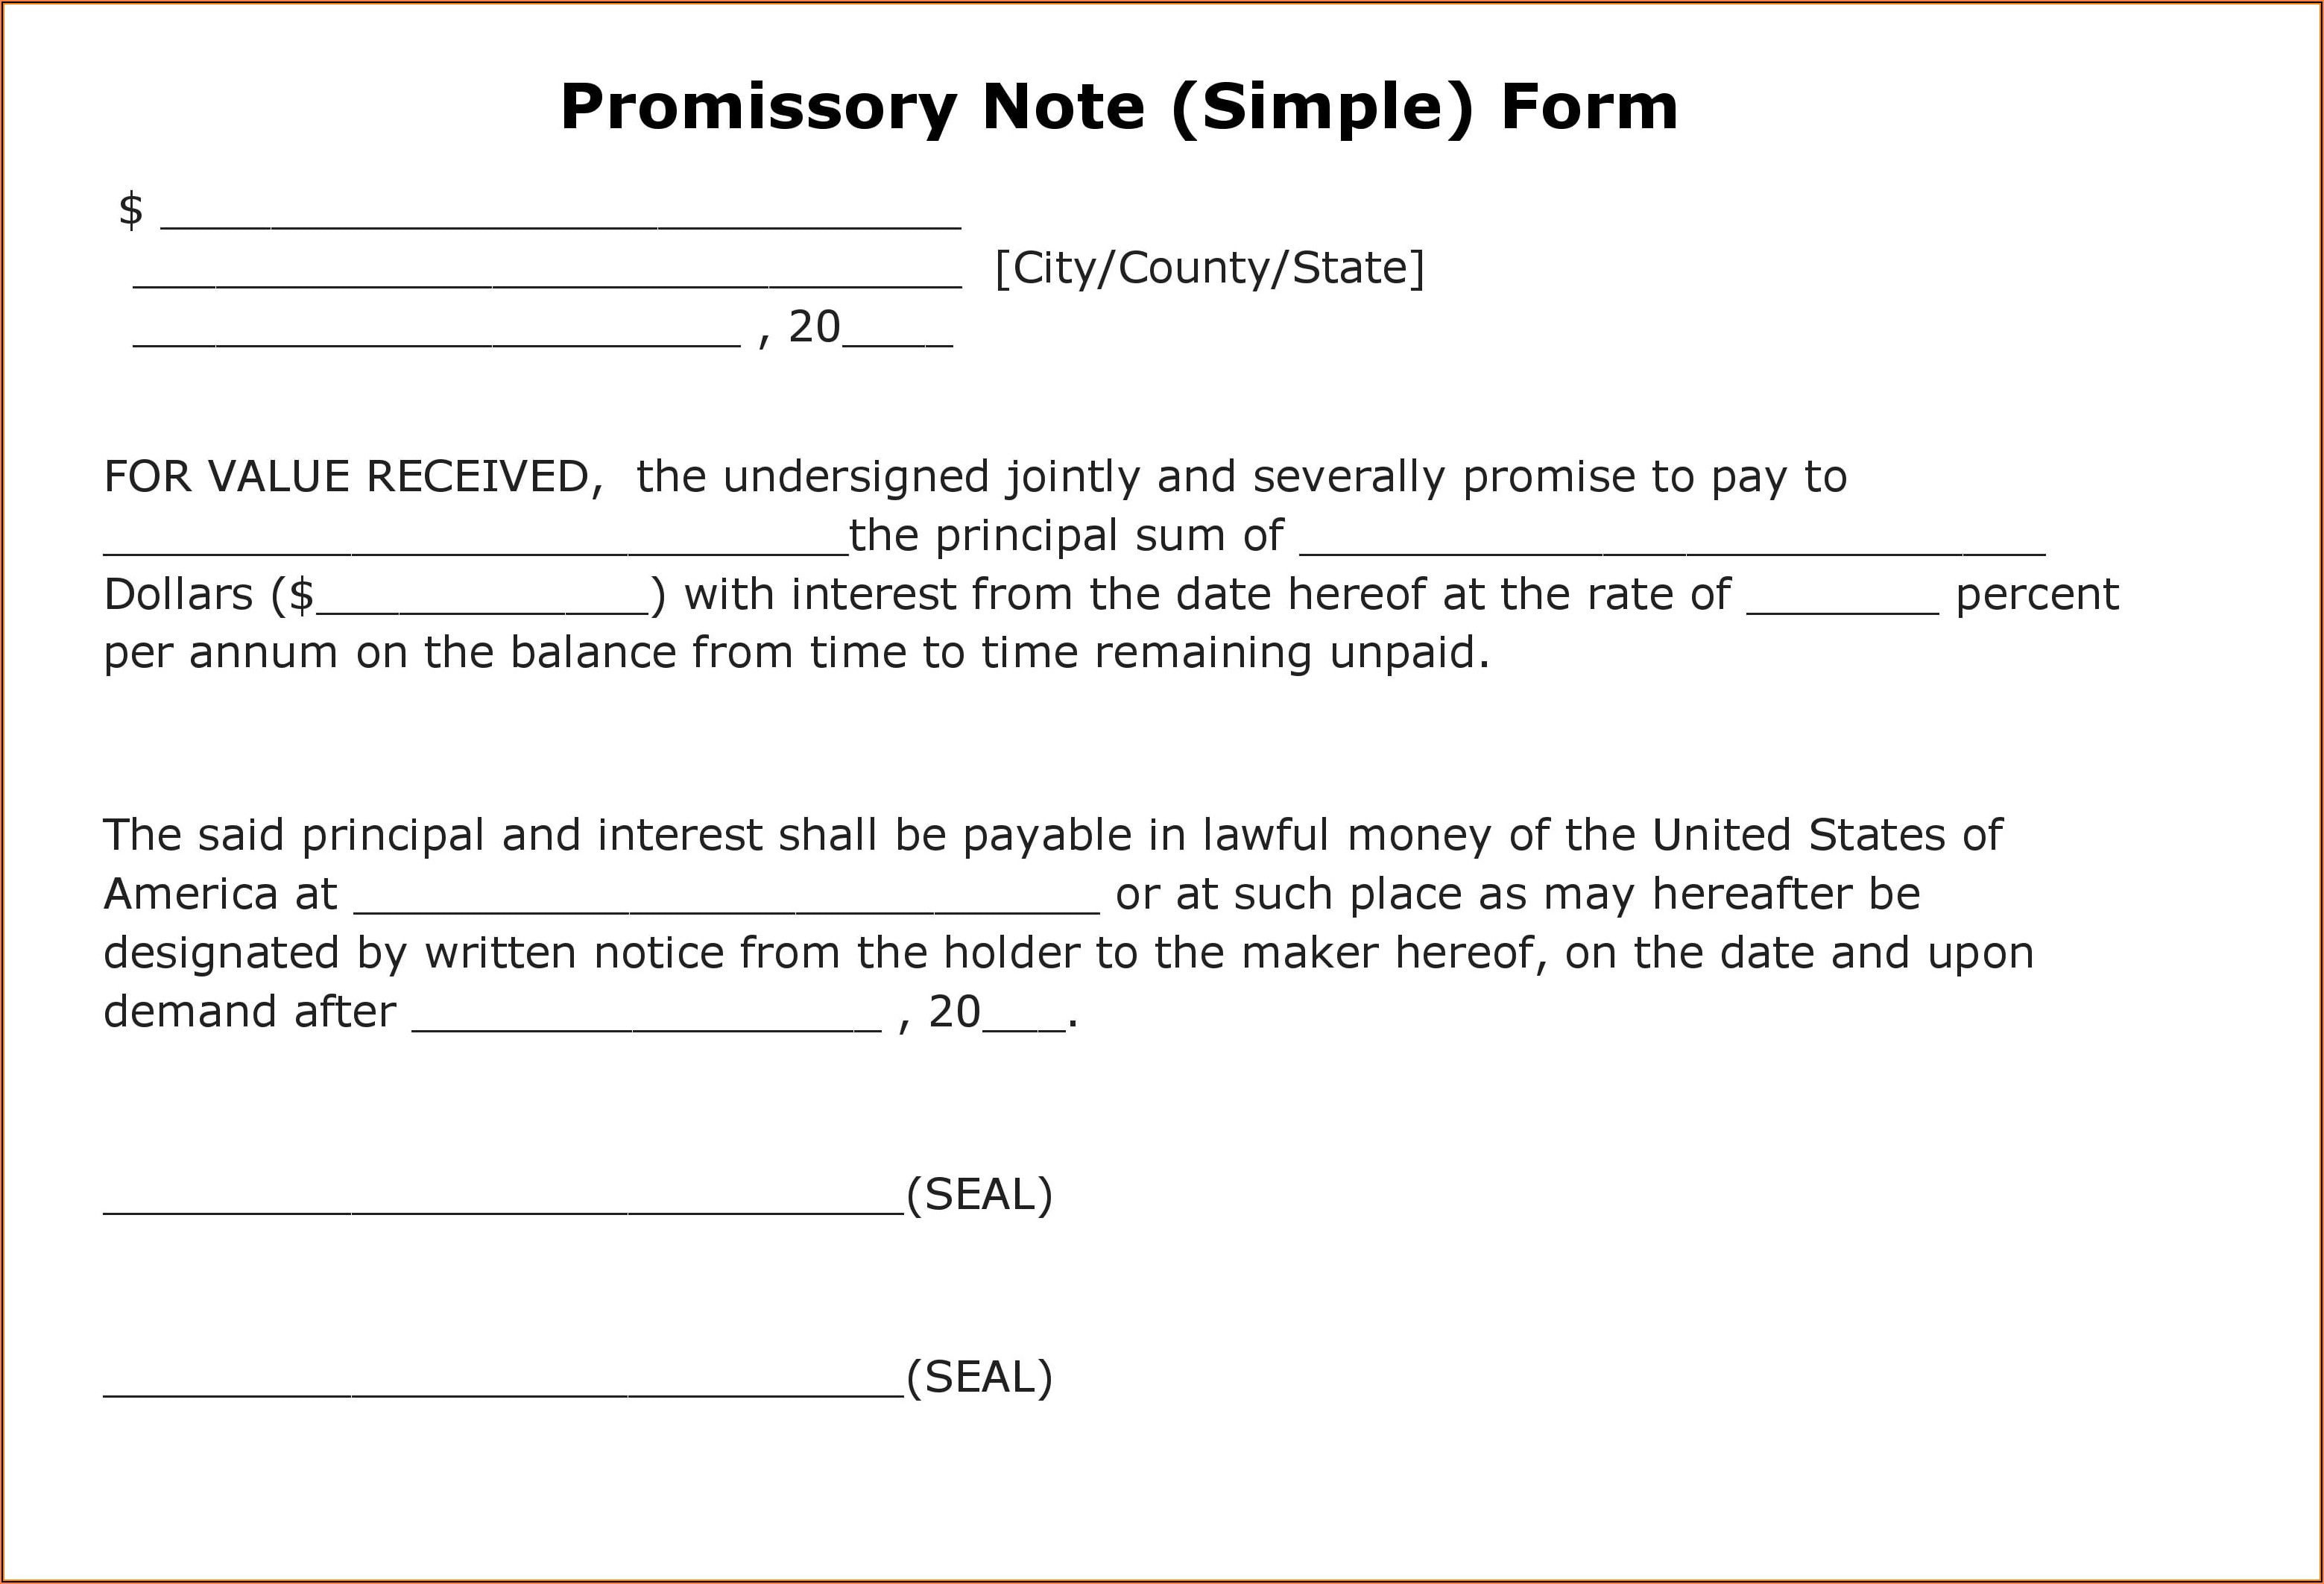 The Real Estate Commission Approved Earnest Money Promissory Note Form ...